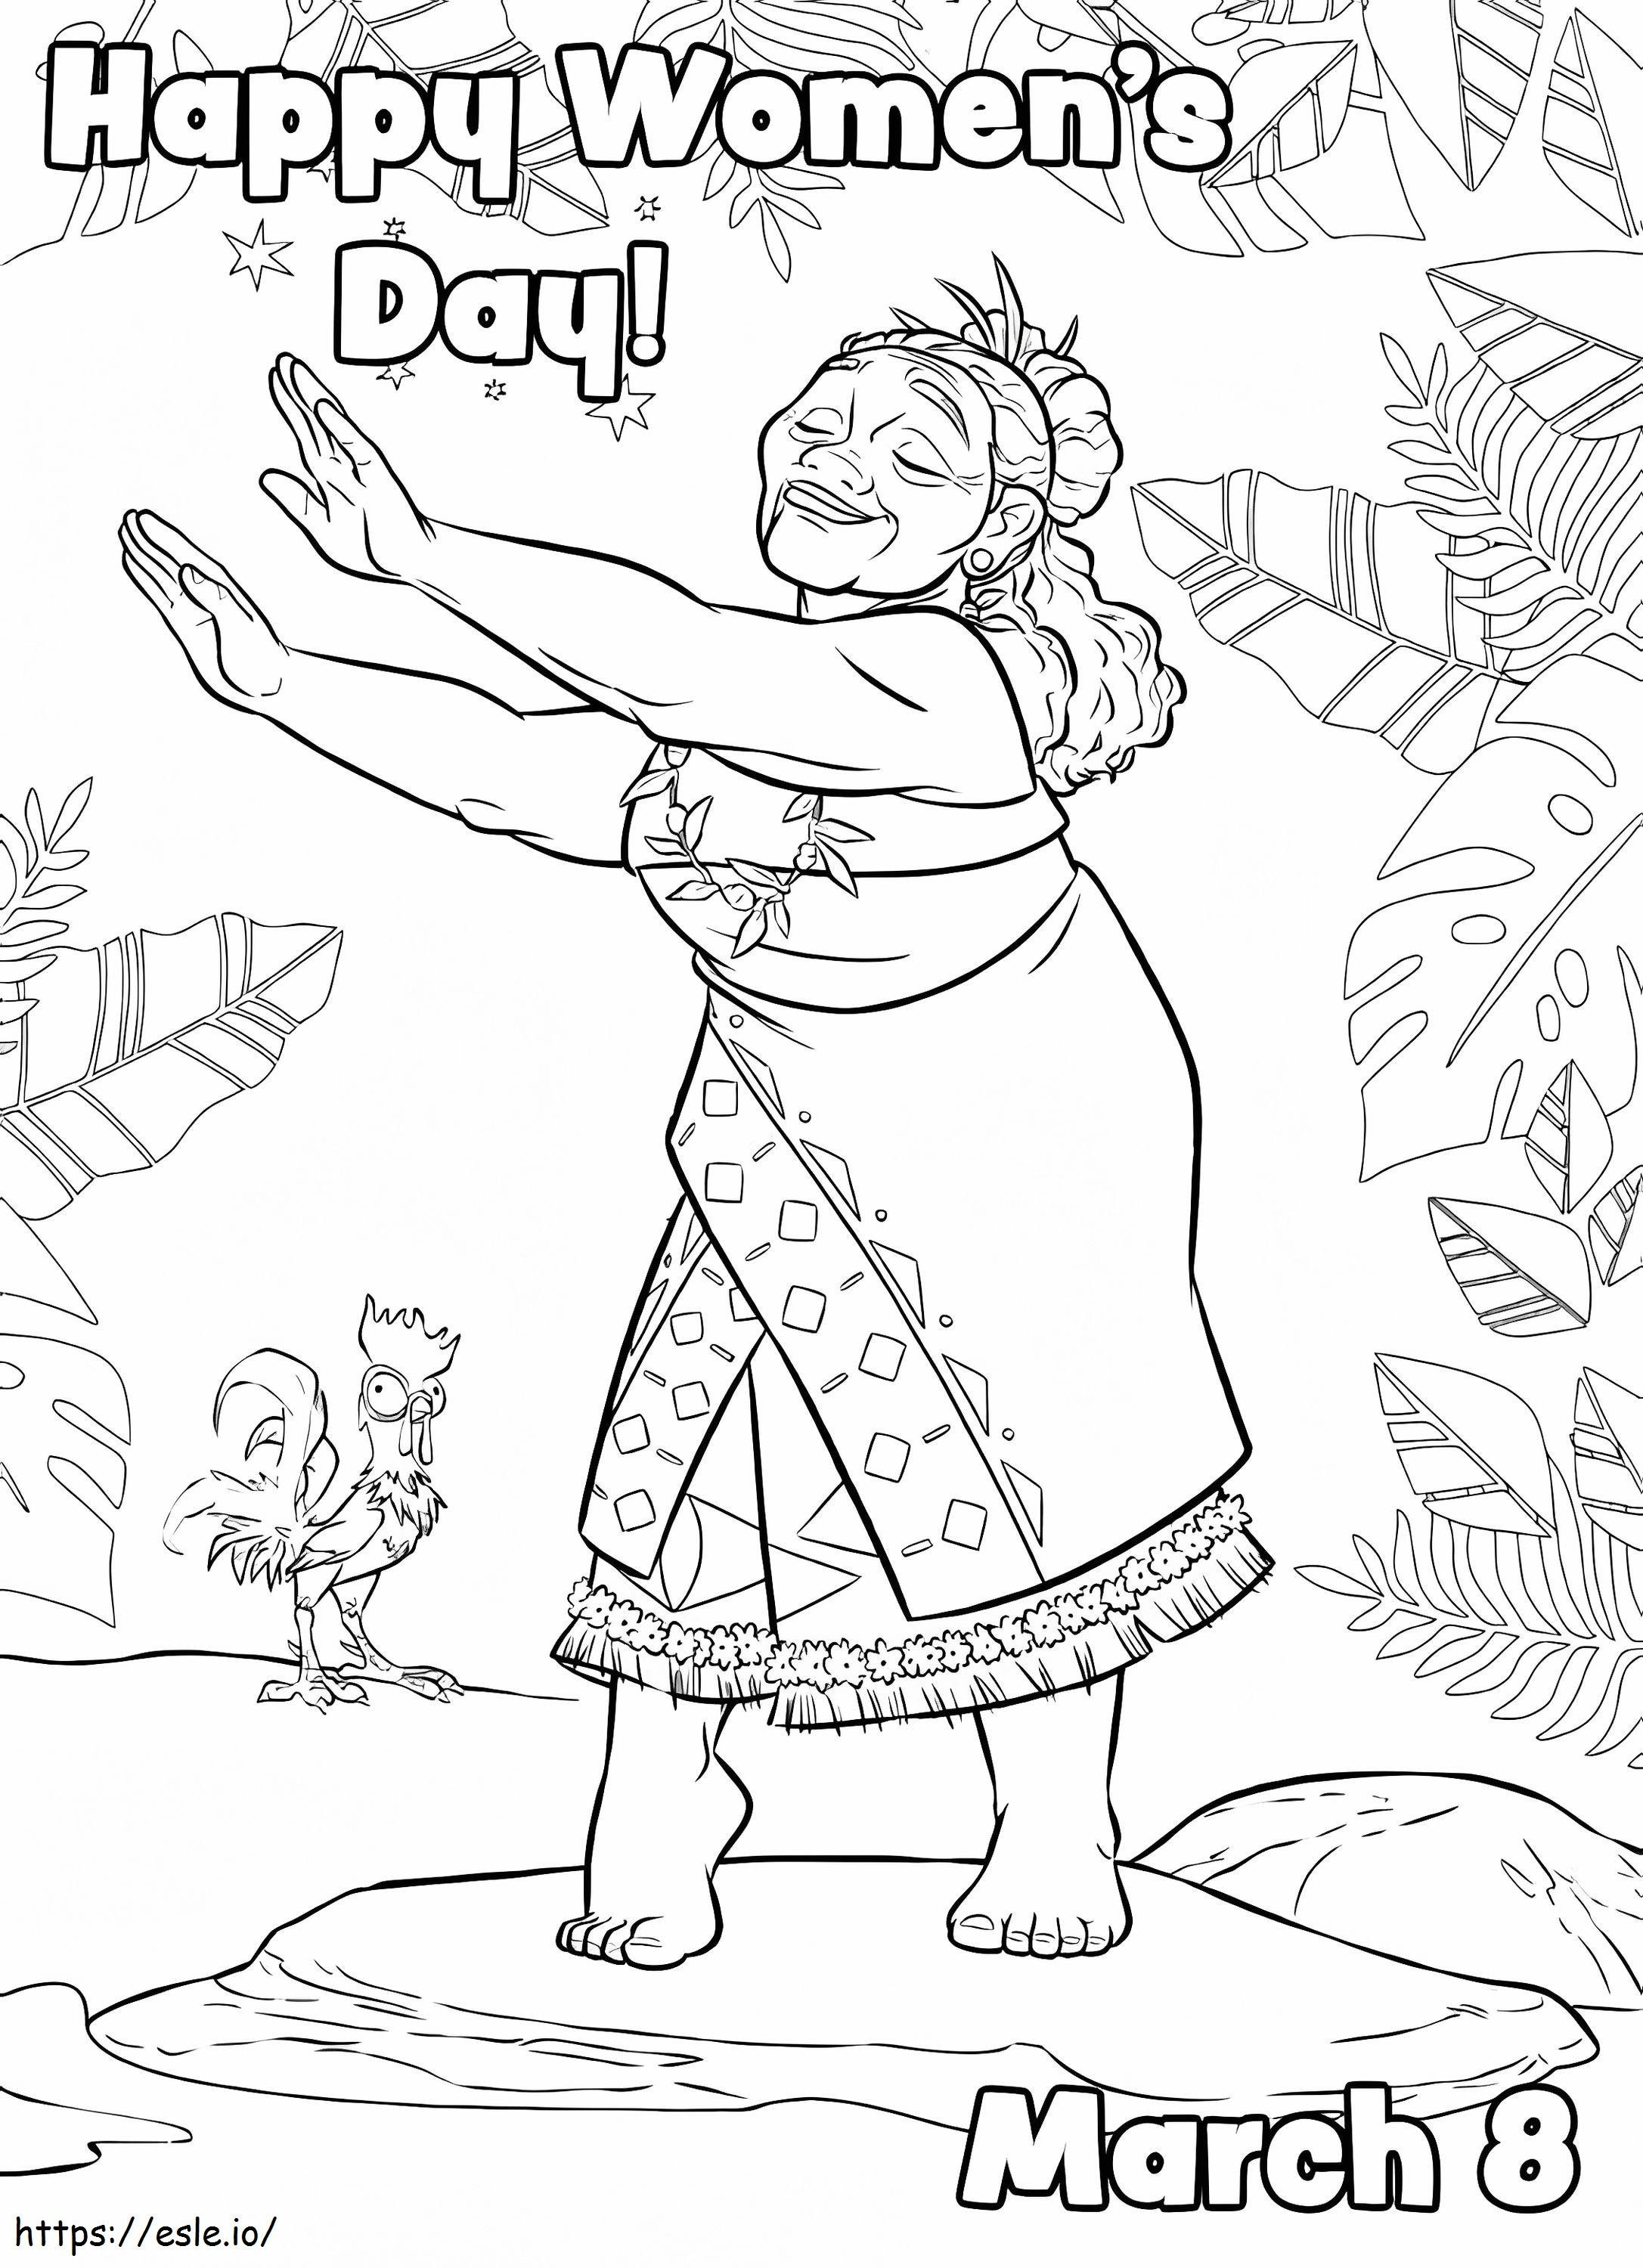 Happy Womens Day coloring page